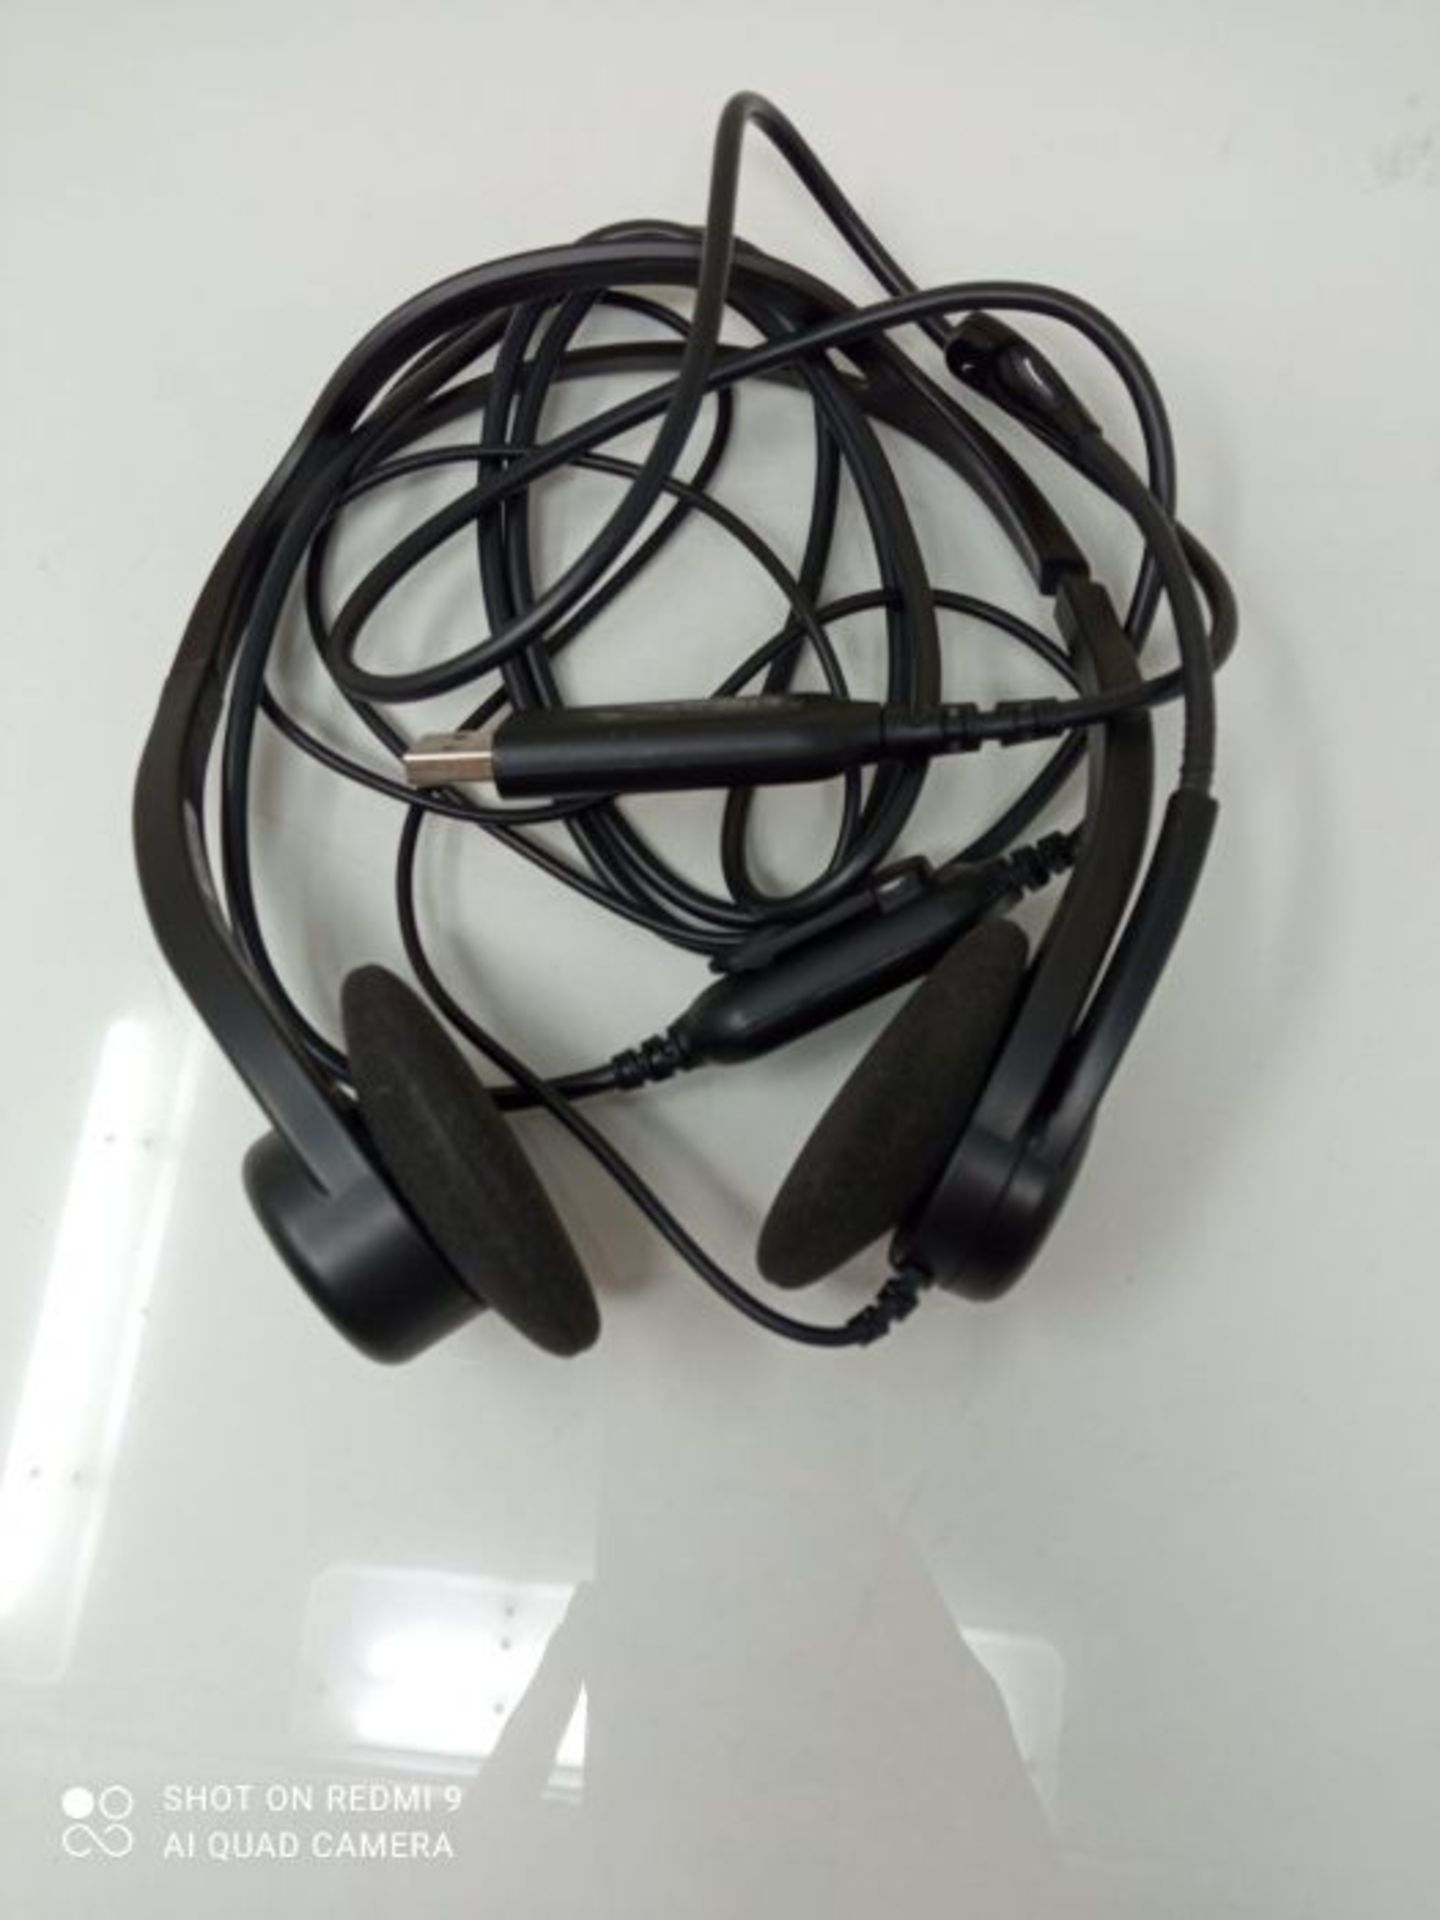 Logitech 960 Wired Headset, Stereo Headphones with Noise-Cancelling Microphone, USB, L - Image 3 of 3